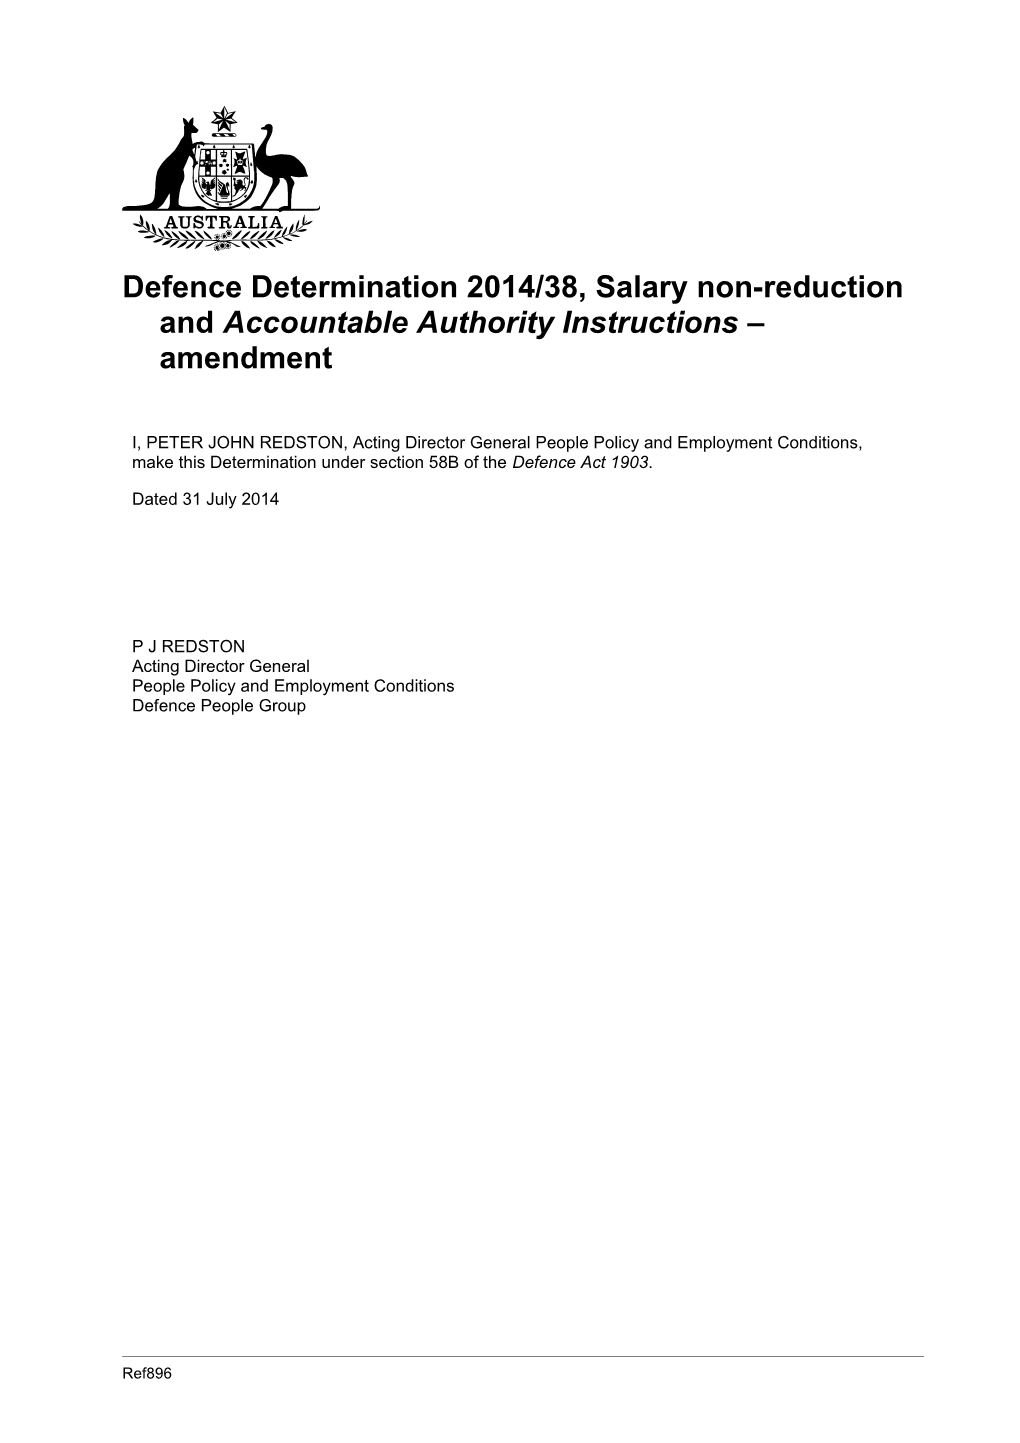 Defence Determination 2014/38, Salary Non-Reduction and Accountable Authority Instructions